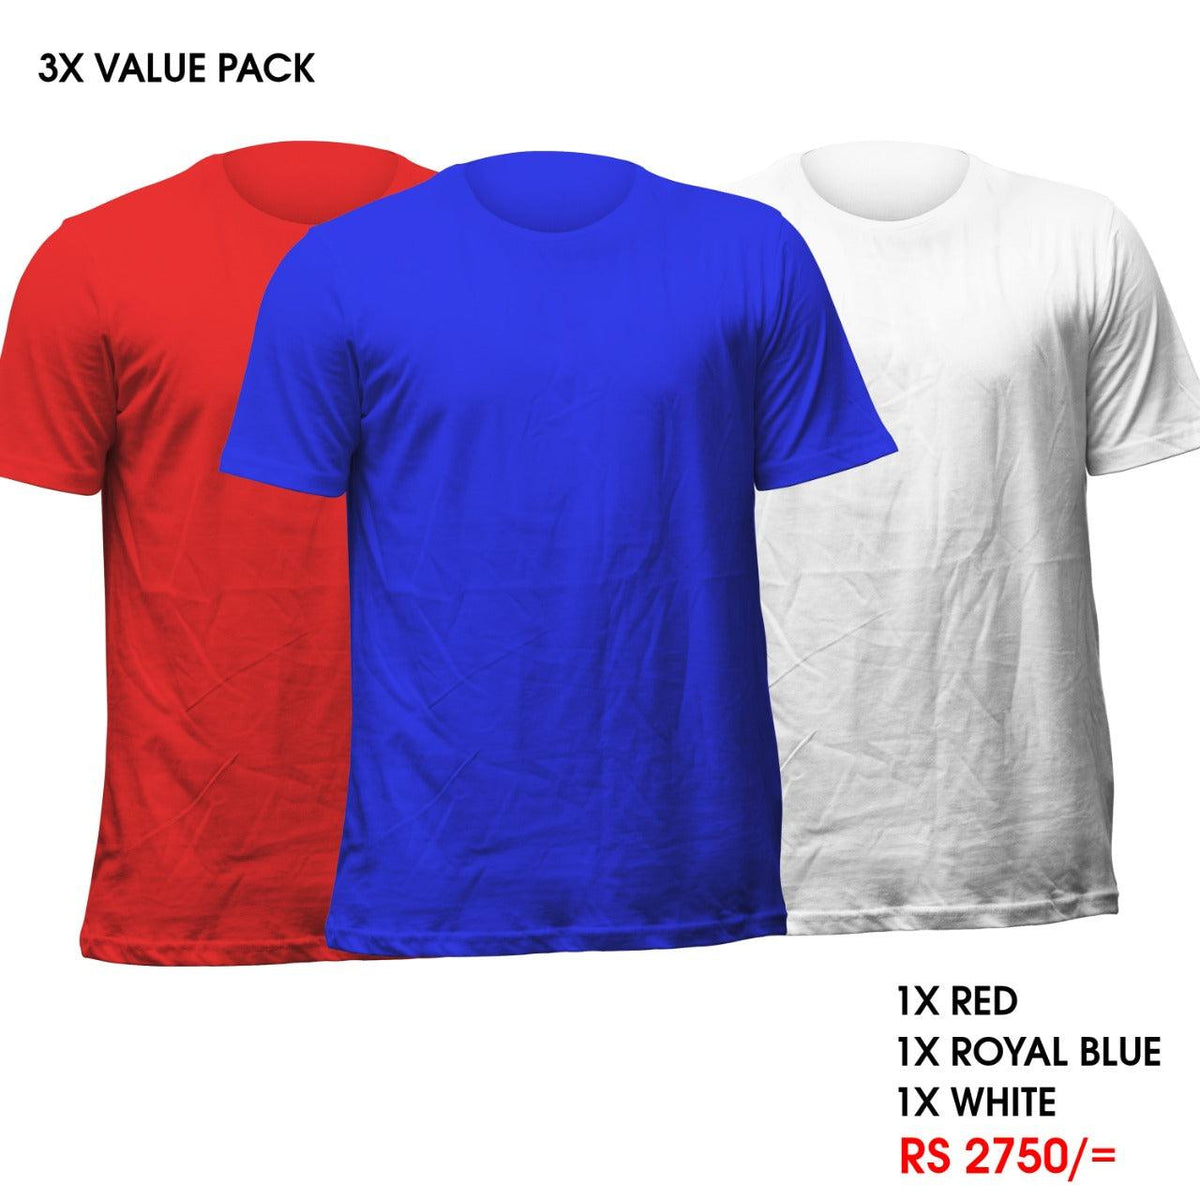 3 Crew Neck T-Shirts Pack - Royal Blue, Red, White Vyboo